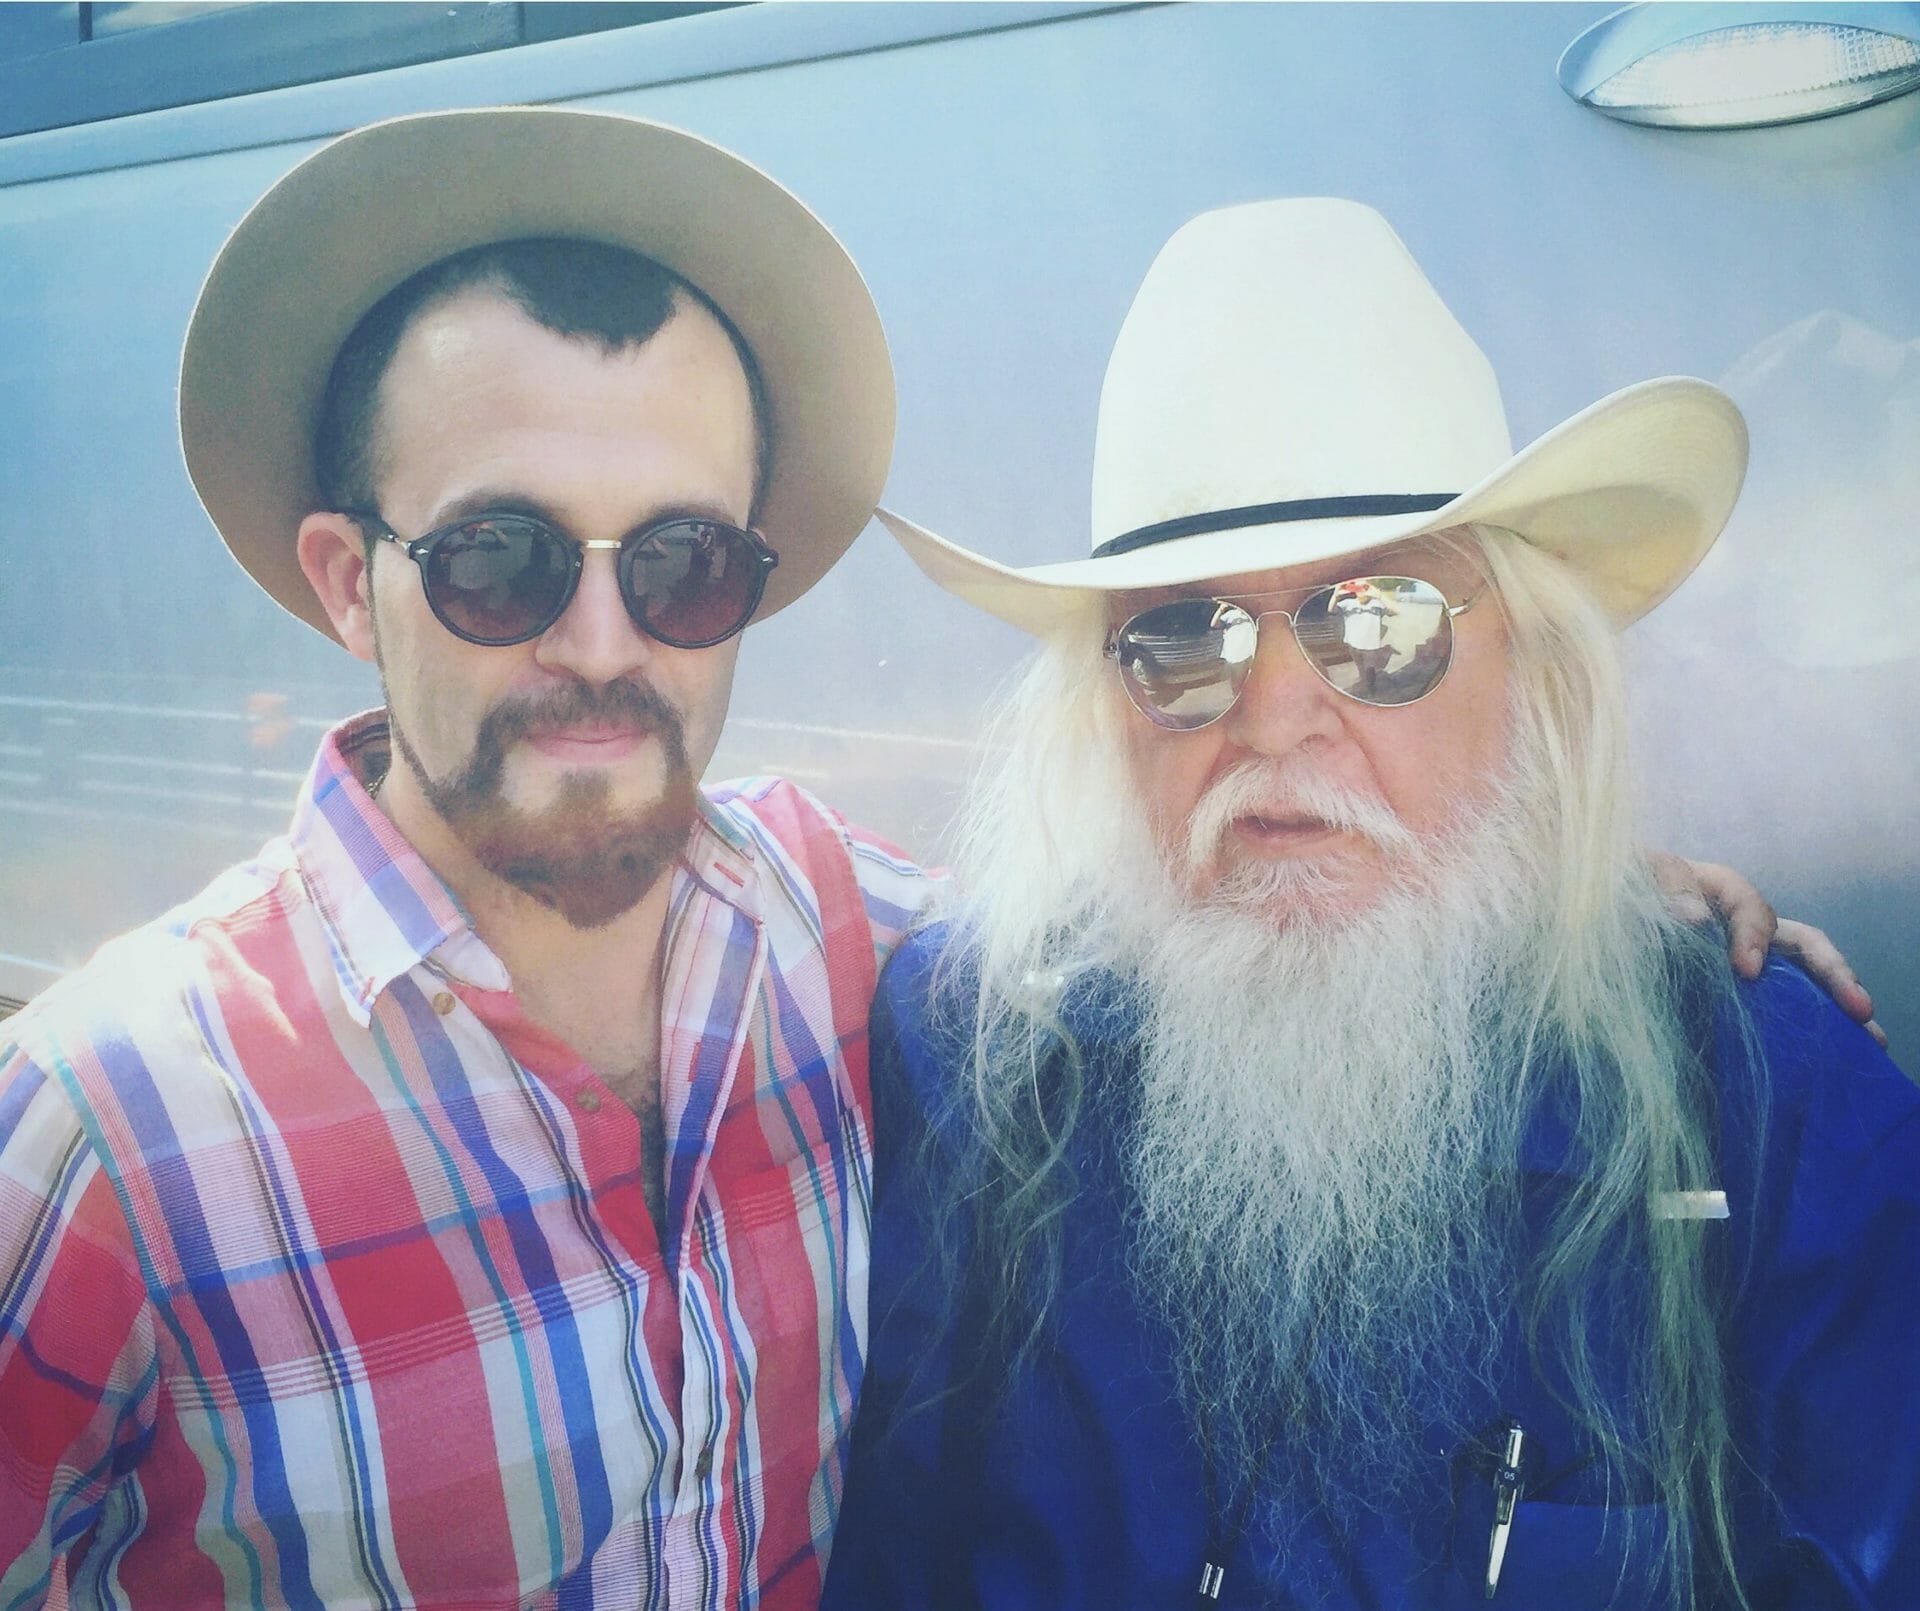 Behind The Scene: Director Jesse Lauter on Leon Russell, Susan Tedeschi and Derek Trucks and “Learning to Live Together: The Return of Mad Dogs & Englishmen”